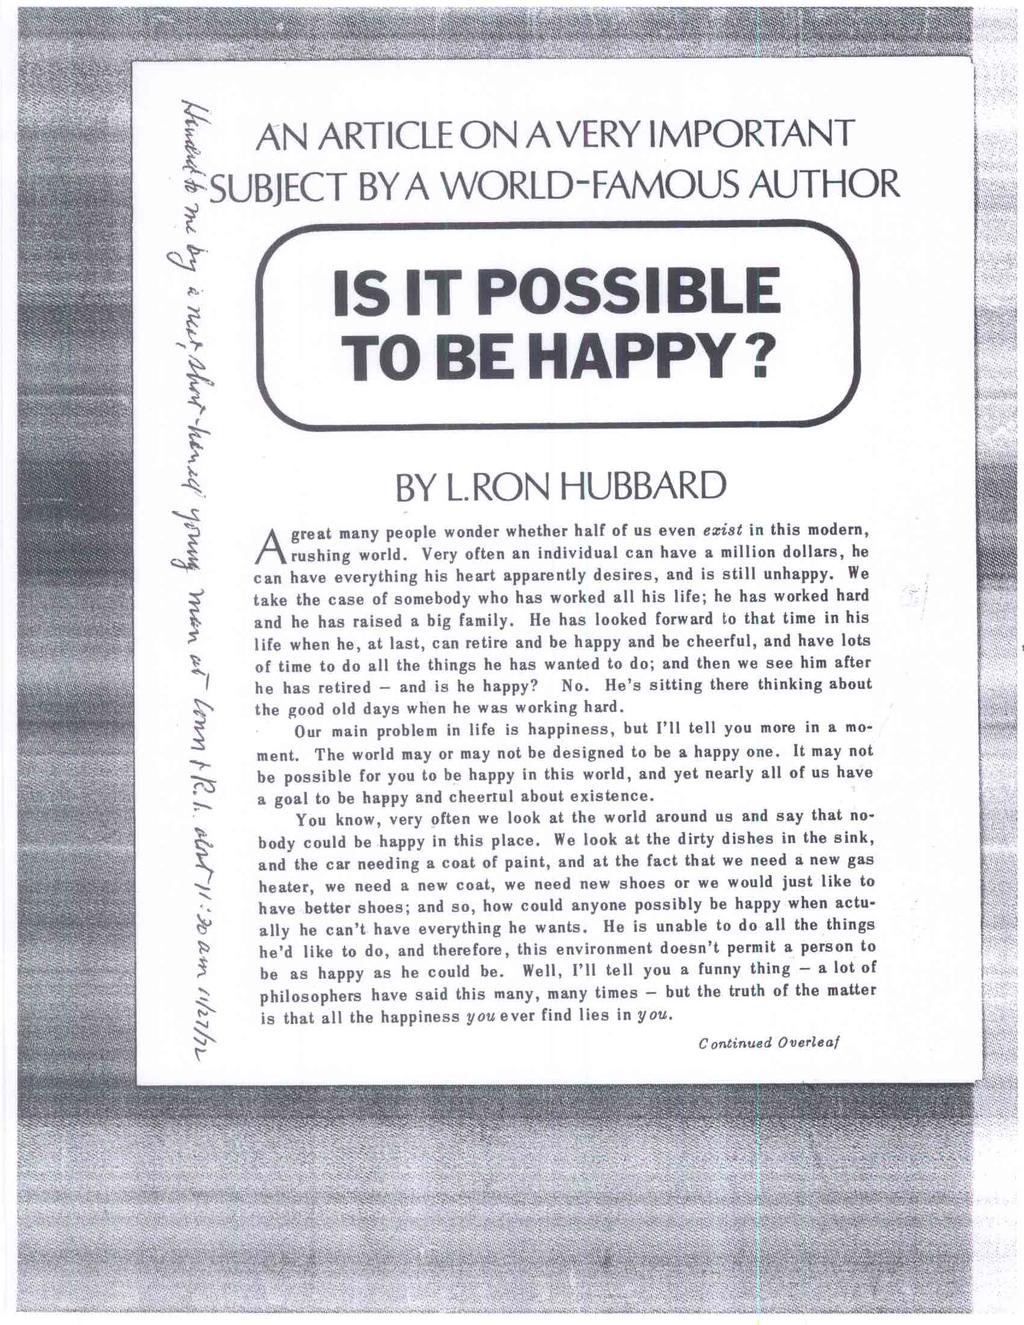 A4?,1.2: Ș,',, AO; AN ARTICLE ON AVERY IMPORTANT 4_,*- SUBJECT BY A WORLD FAMOUS AUTHOR _. Qs, r IS IT POSSIBLE TO BE HAPPY? BY L.